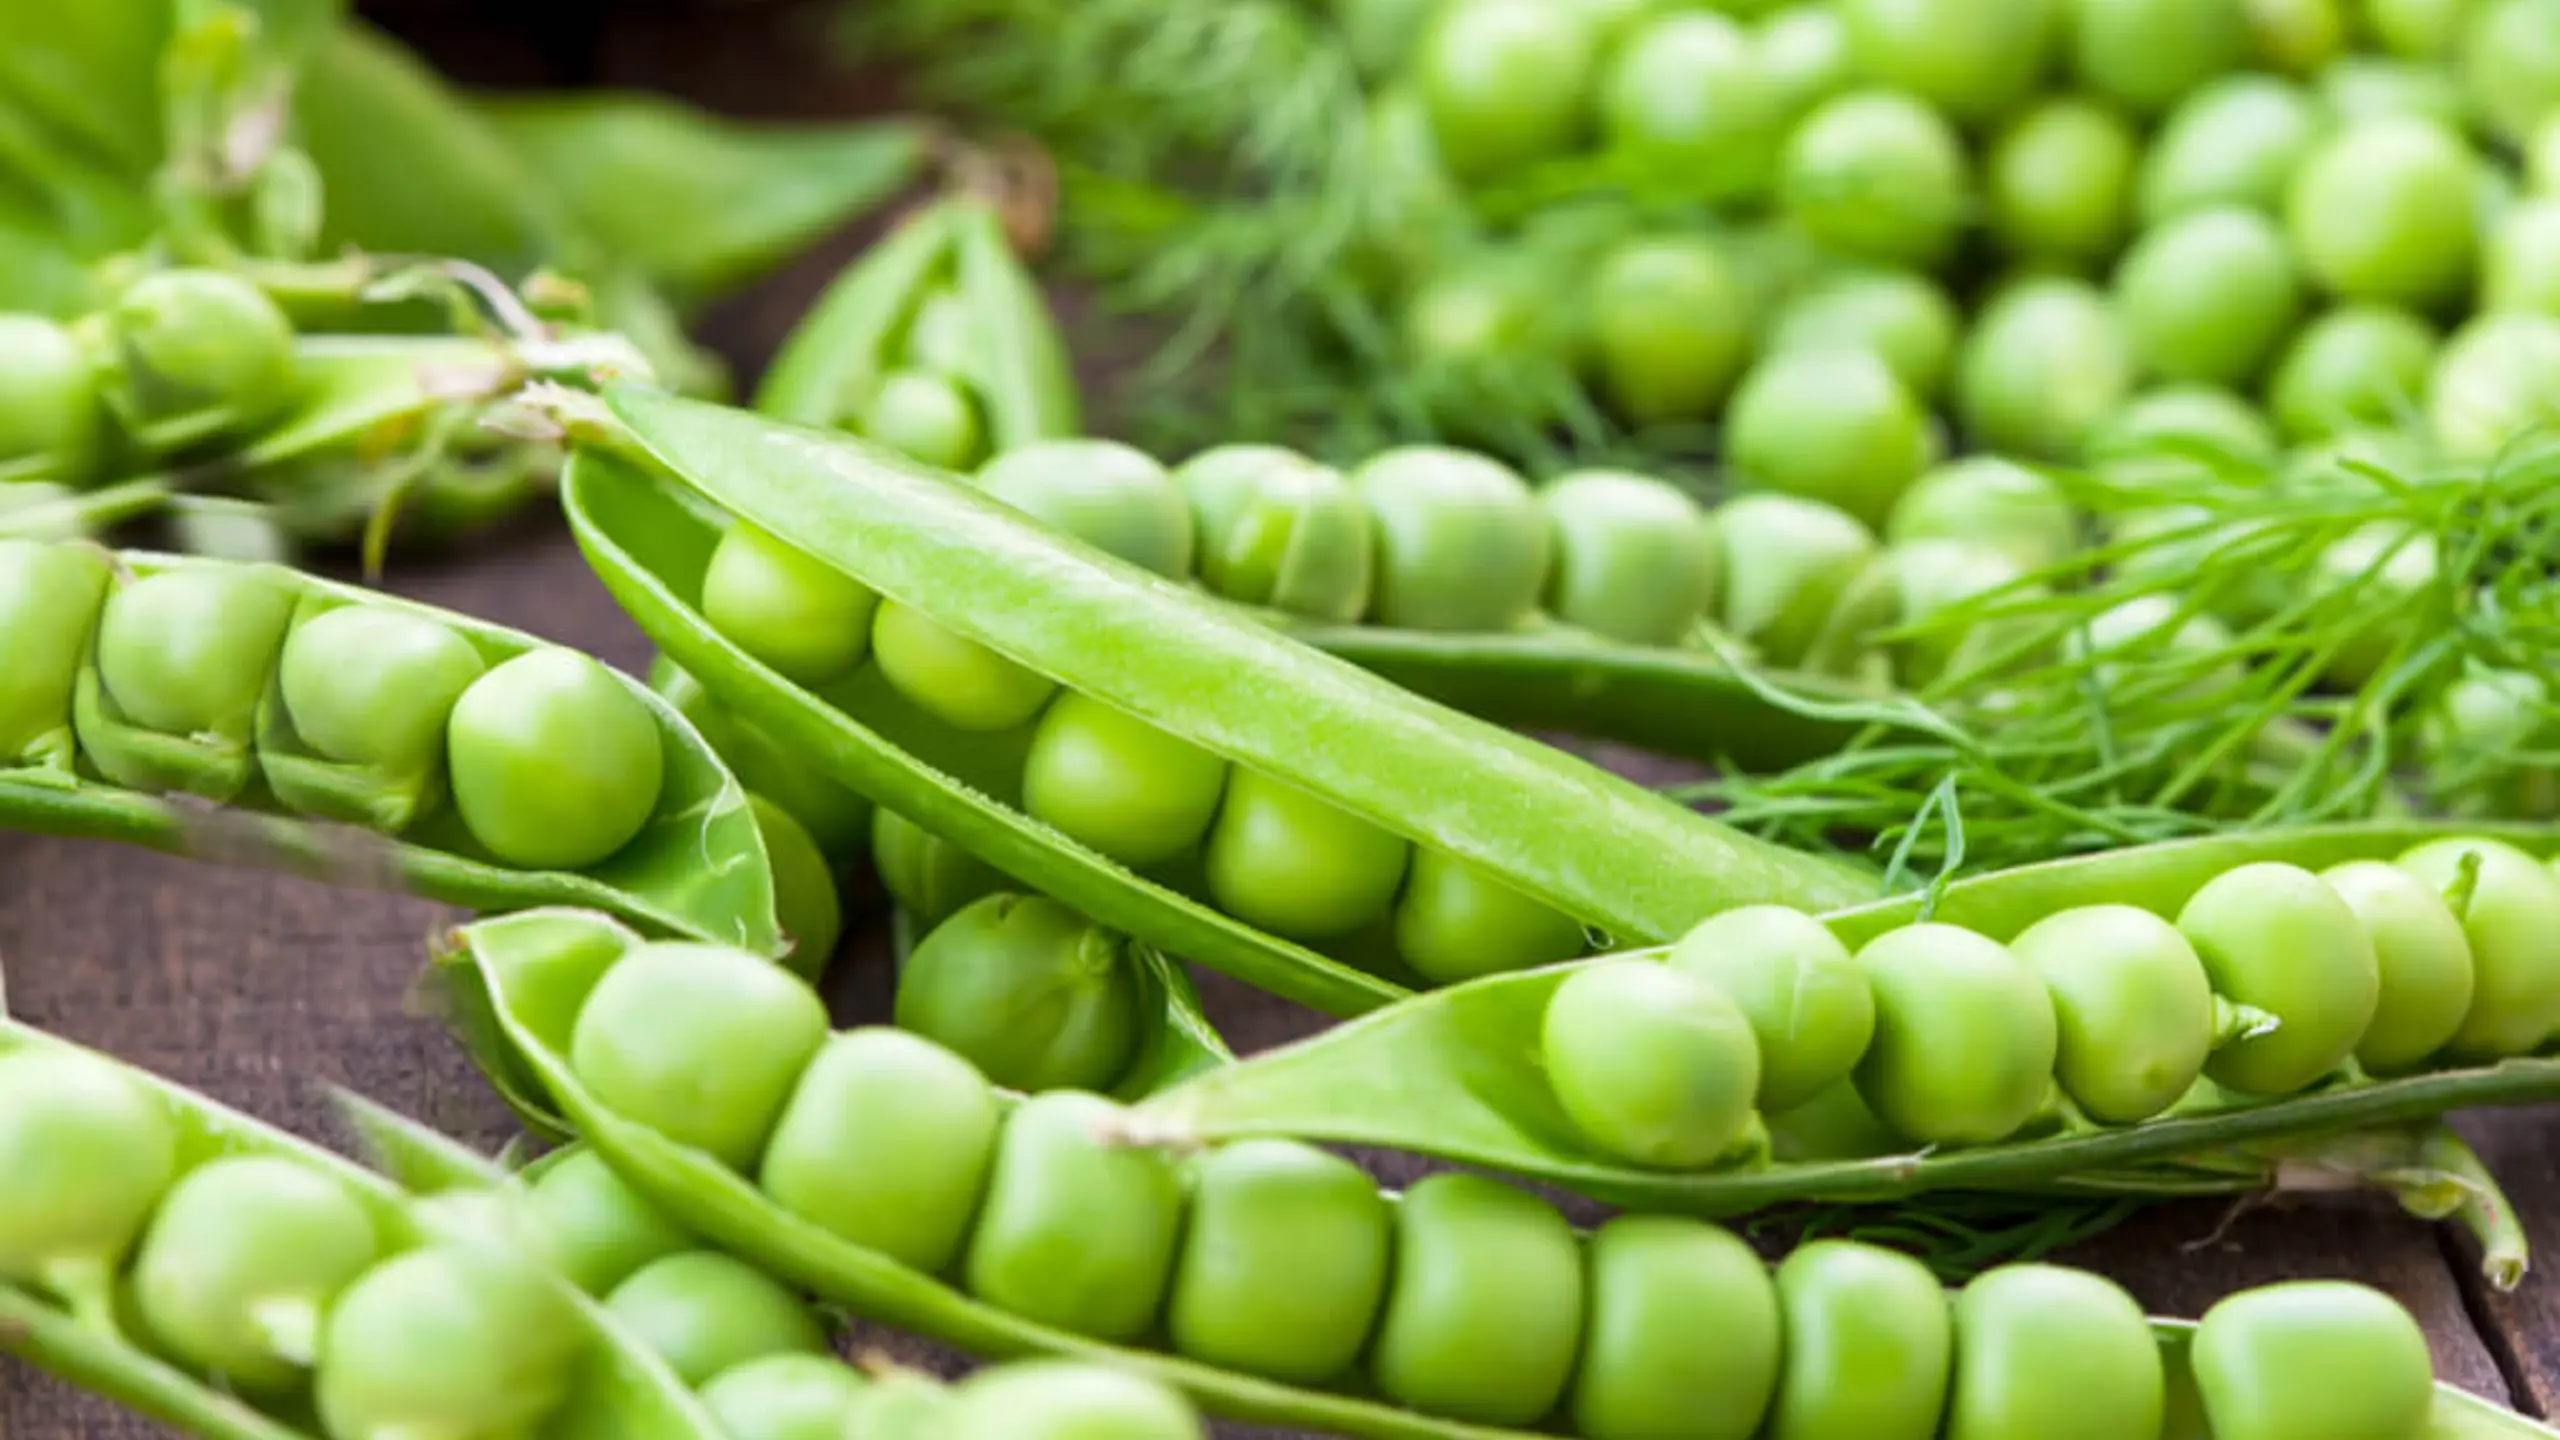 What are Peas The Tiny But Mighty Superfood